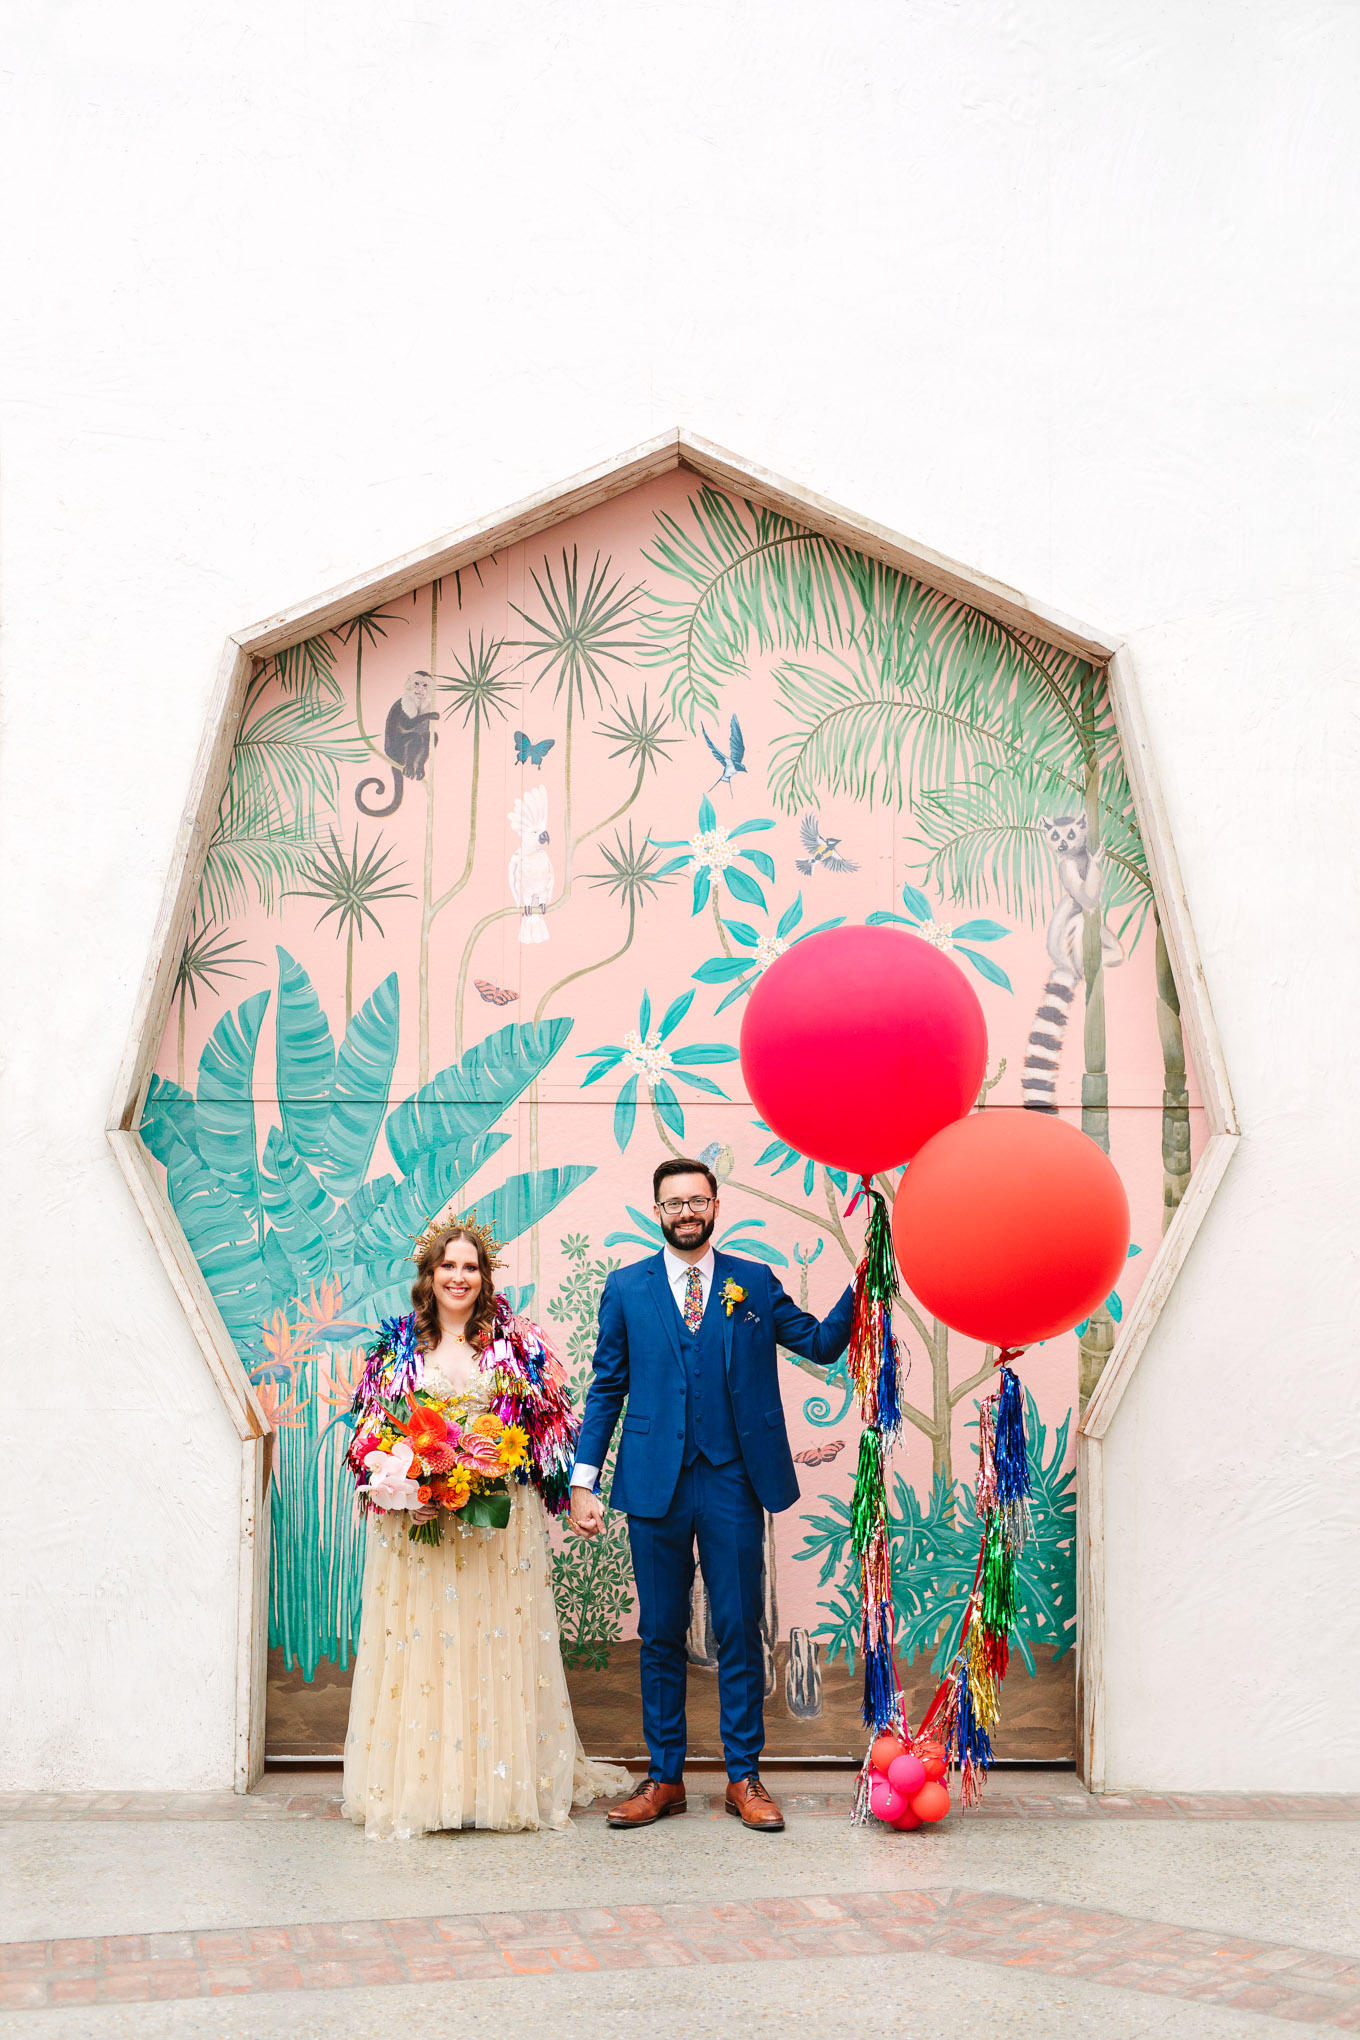 Bride and groom with colorful giant balloons First look between bride and groom | Colorful Downtown Los Angeles Valentine Wedding | Los Angeles wedding photographer | #losangeleswedding #colorfulwedding #DTLA #valentinedtla   Source: Mary Costa Photography | Los Angeles